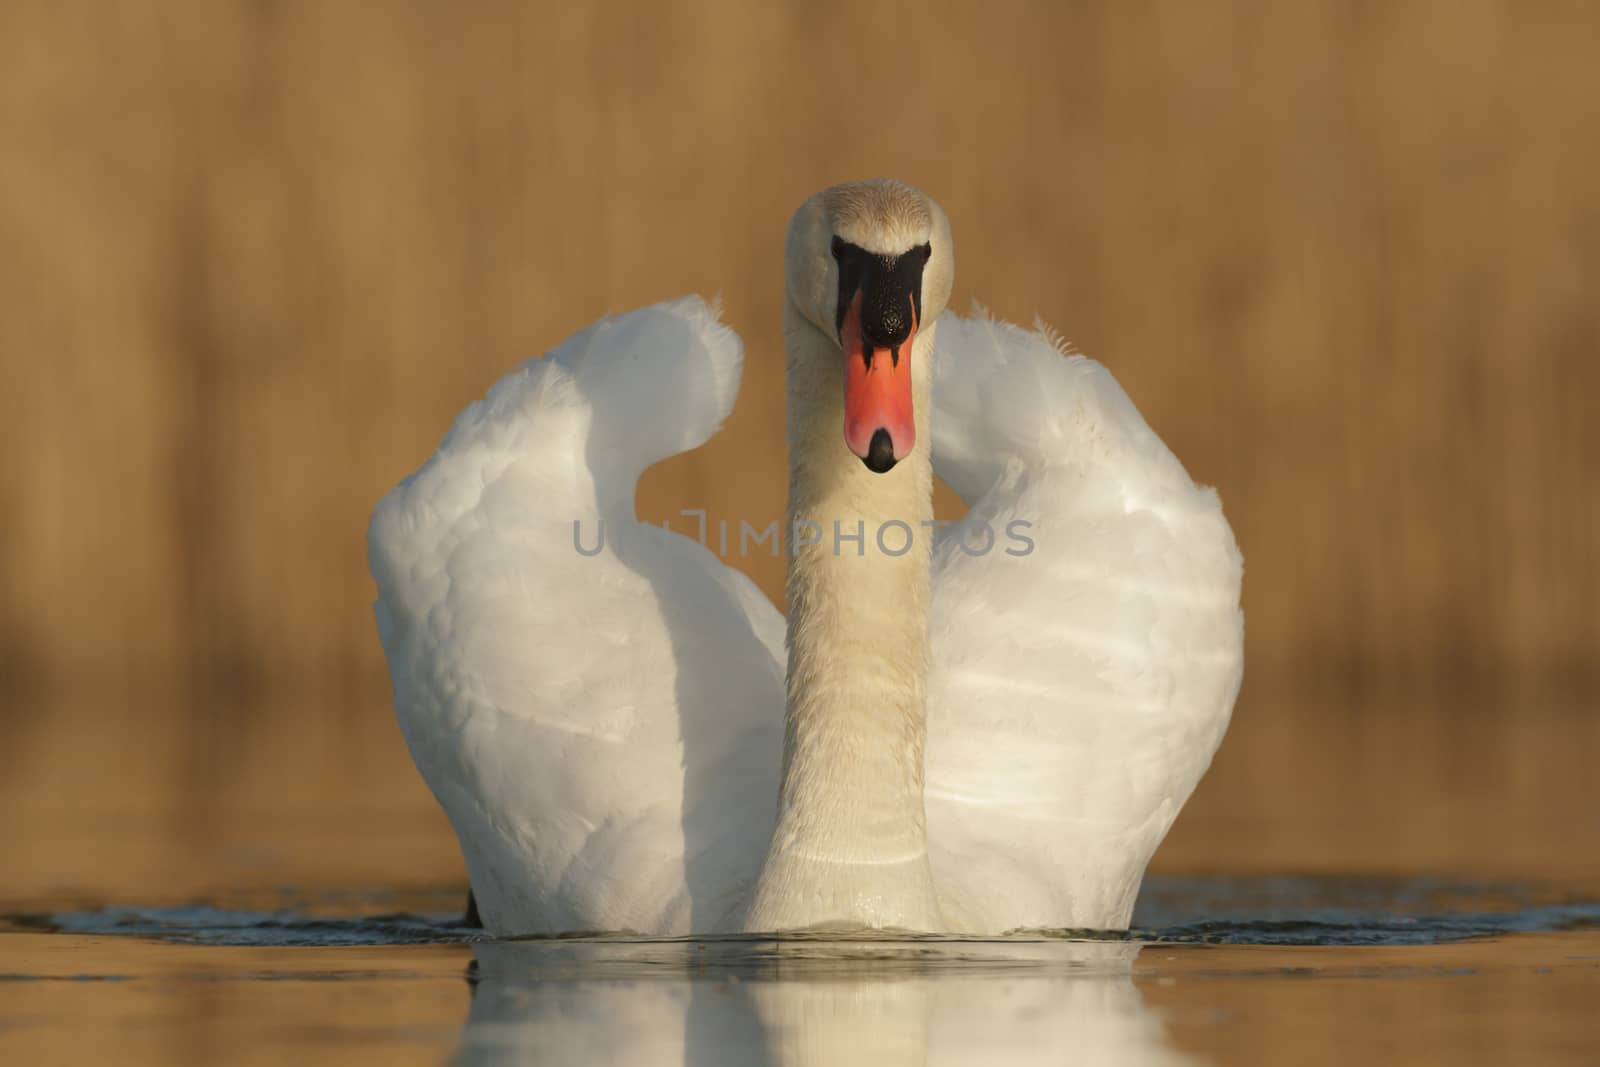 swan on blue lake in sunny day, swans on pond, nature series